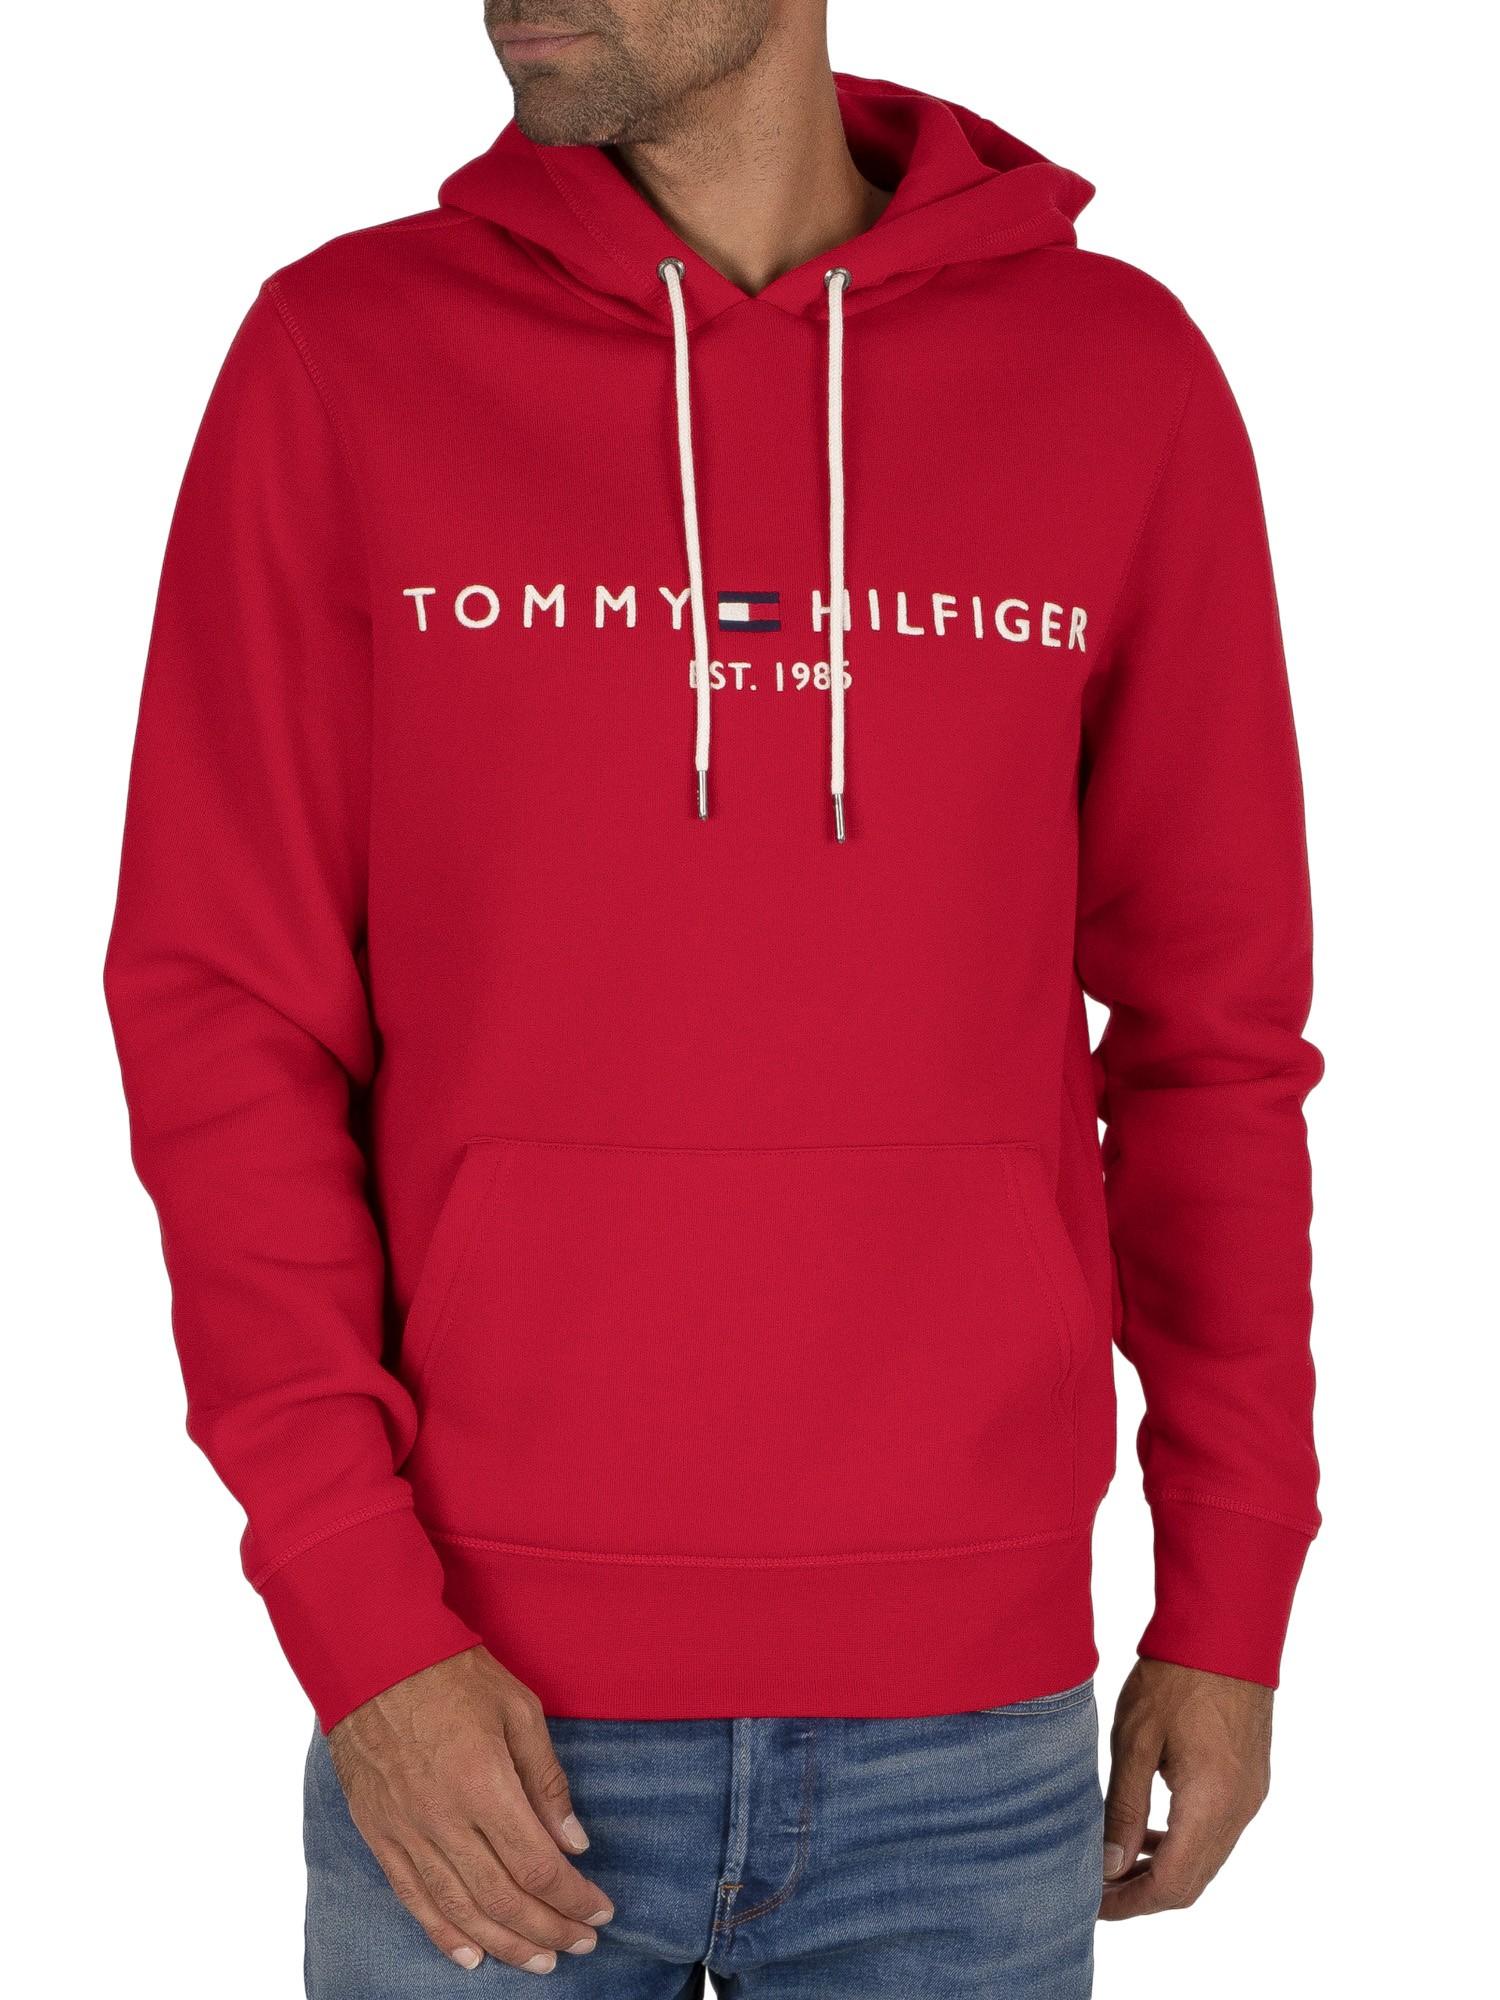 Tommy Hilfiger Graphic Pullover Hoodie in Red for Men - Lyst